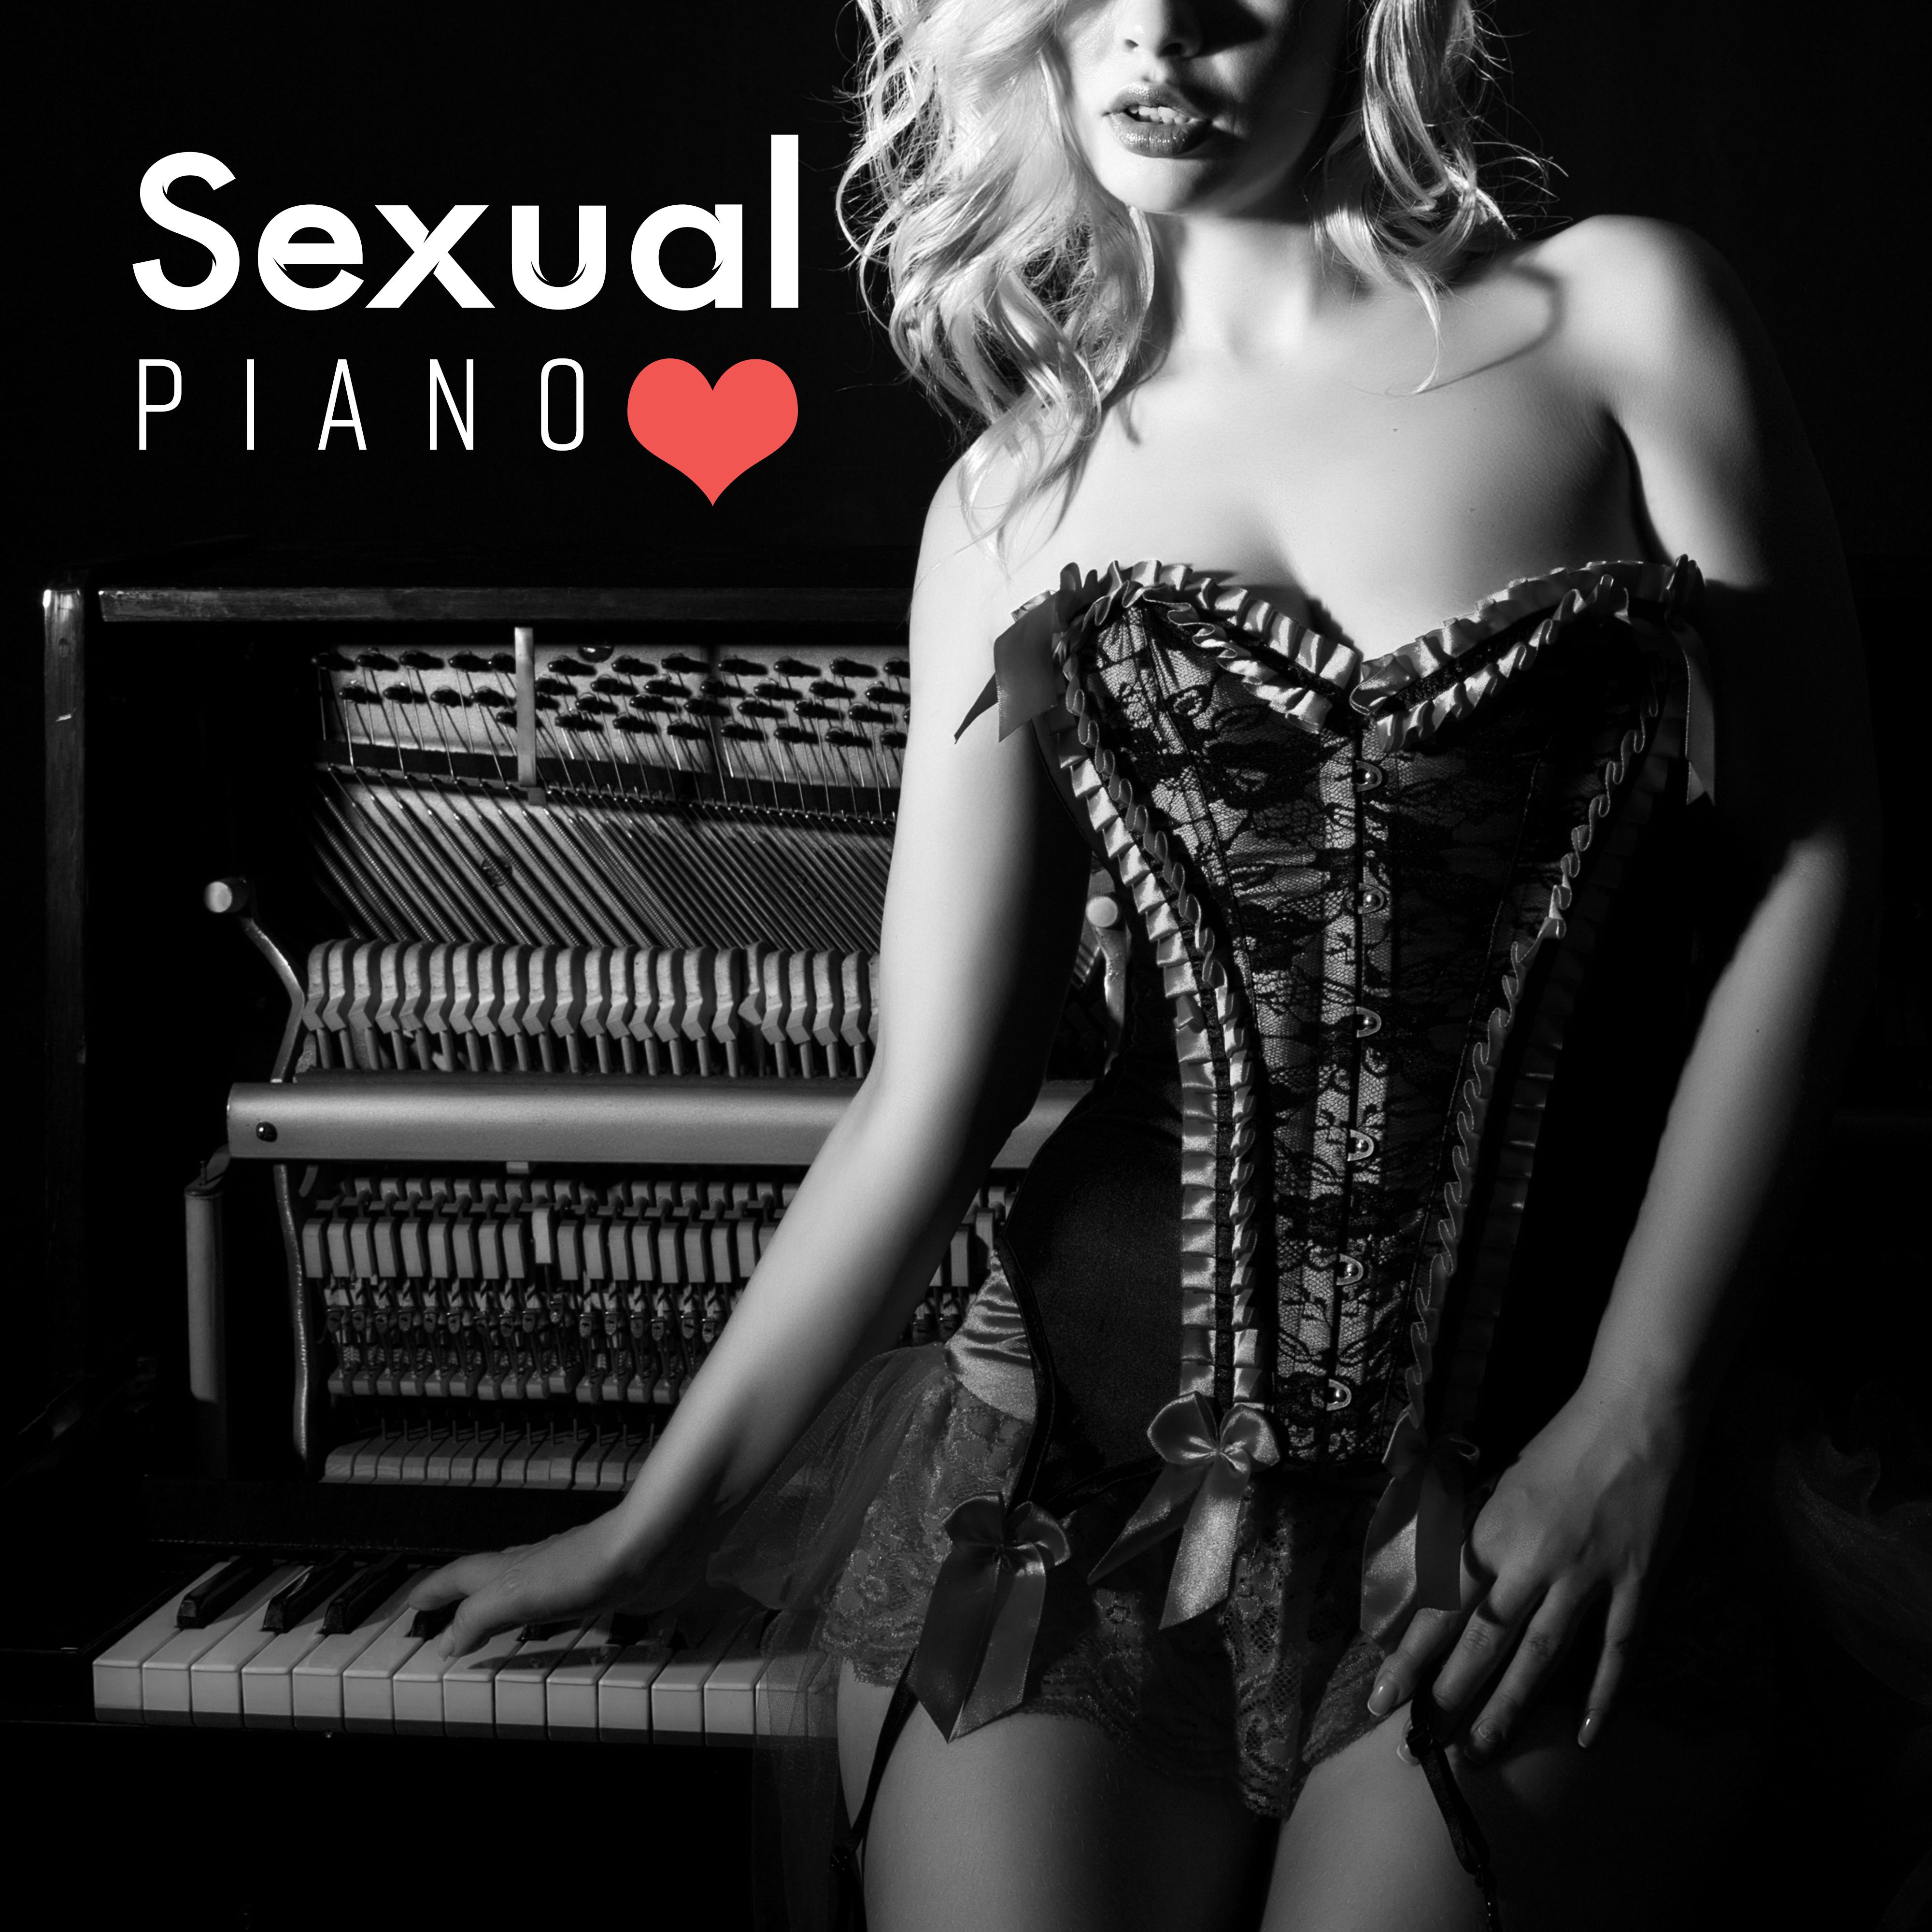 ****** Piano: Jazz Collection of Smooth, **** and Romantic Music for Lovers to Flirt, Erotic Touch, *** and Romance, Kamasutra or Tantric ***